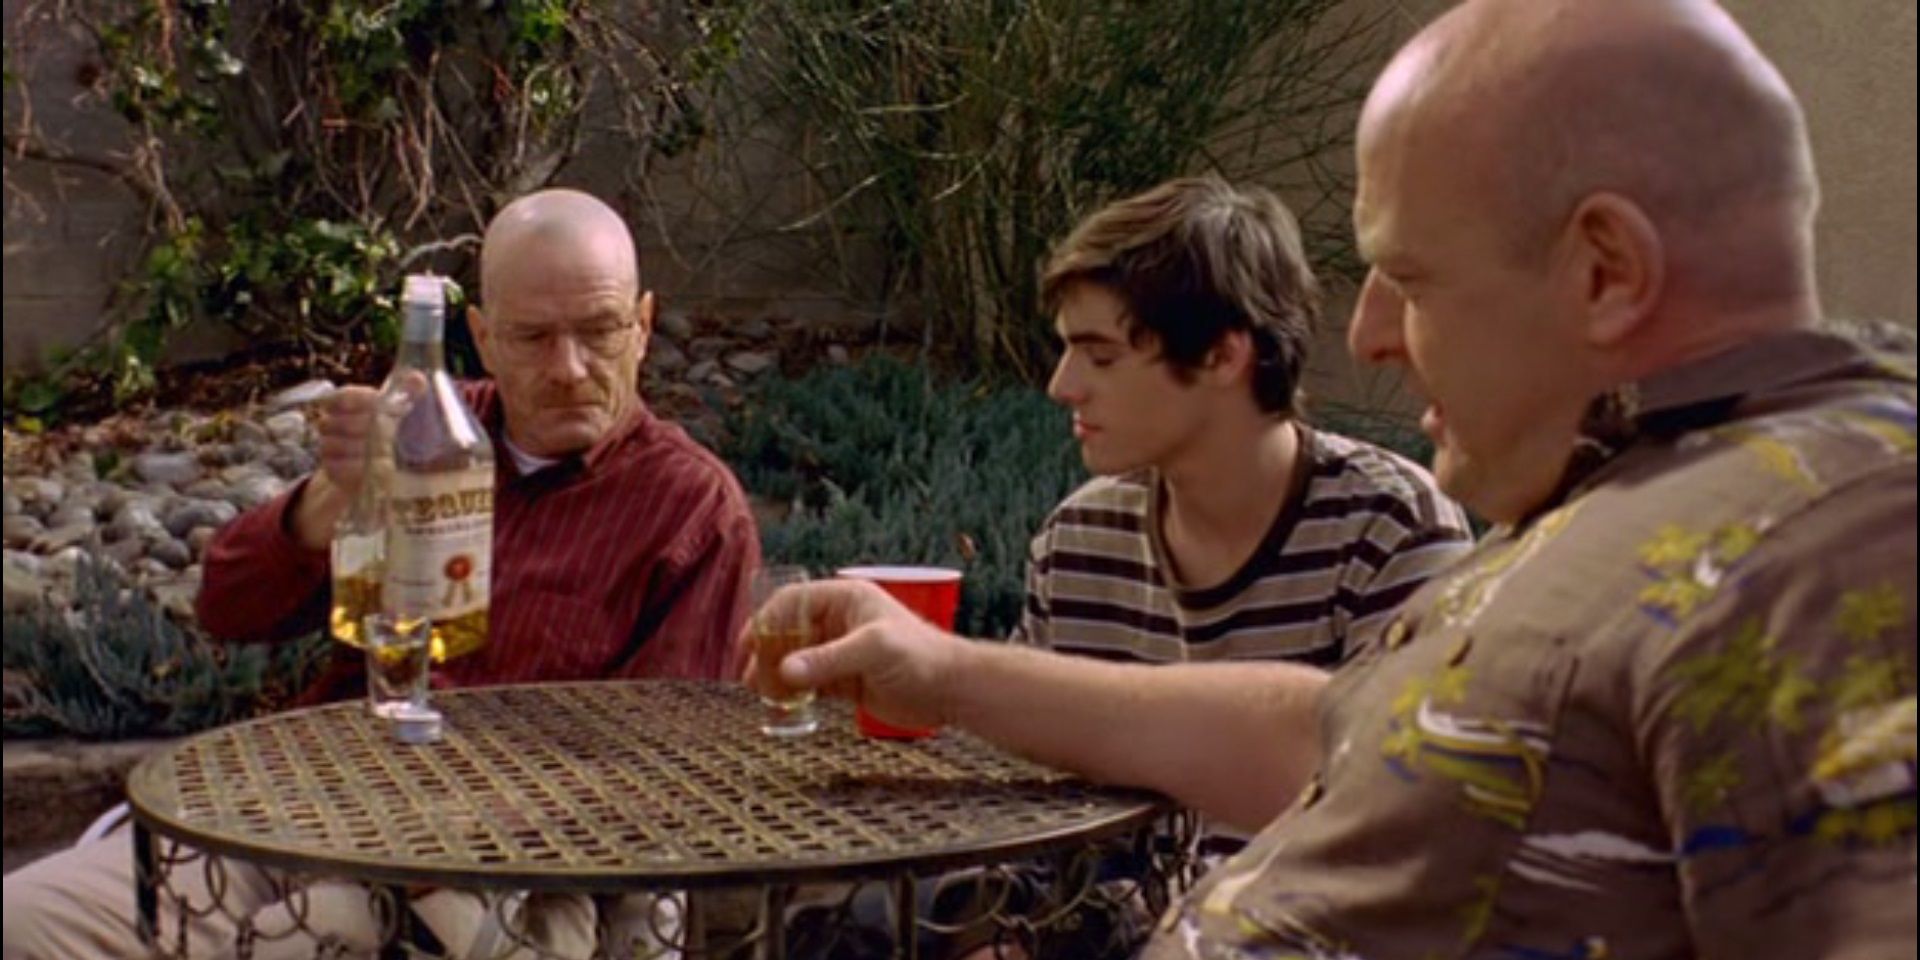 Walt forces Walter Jr to drink more liqour than he can handle